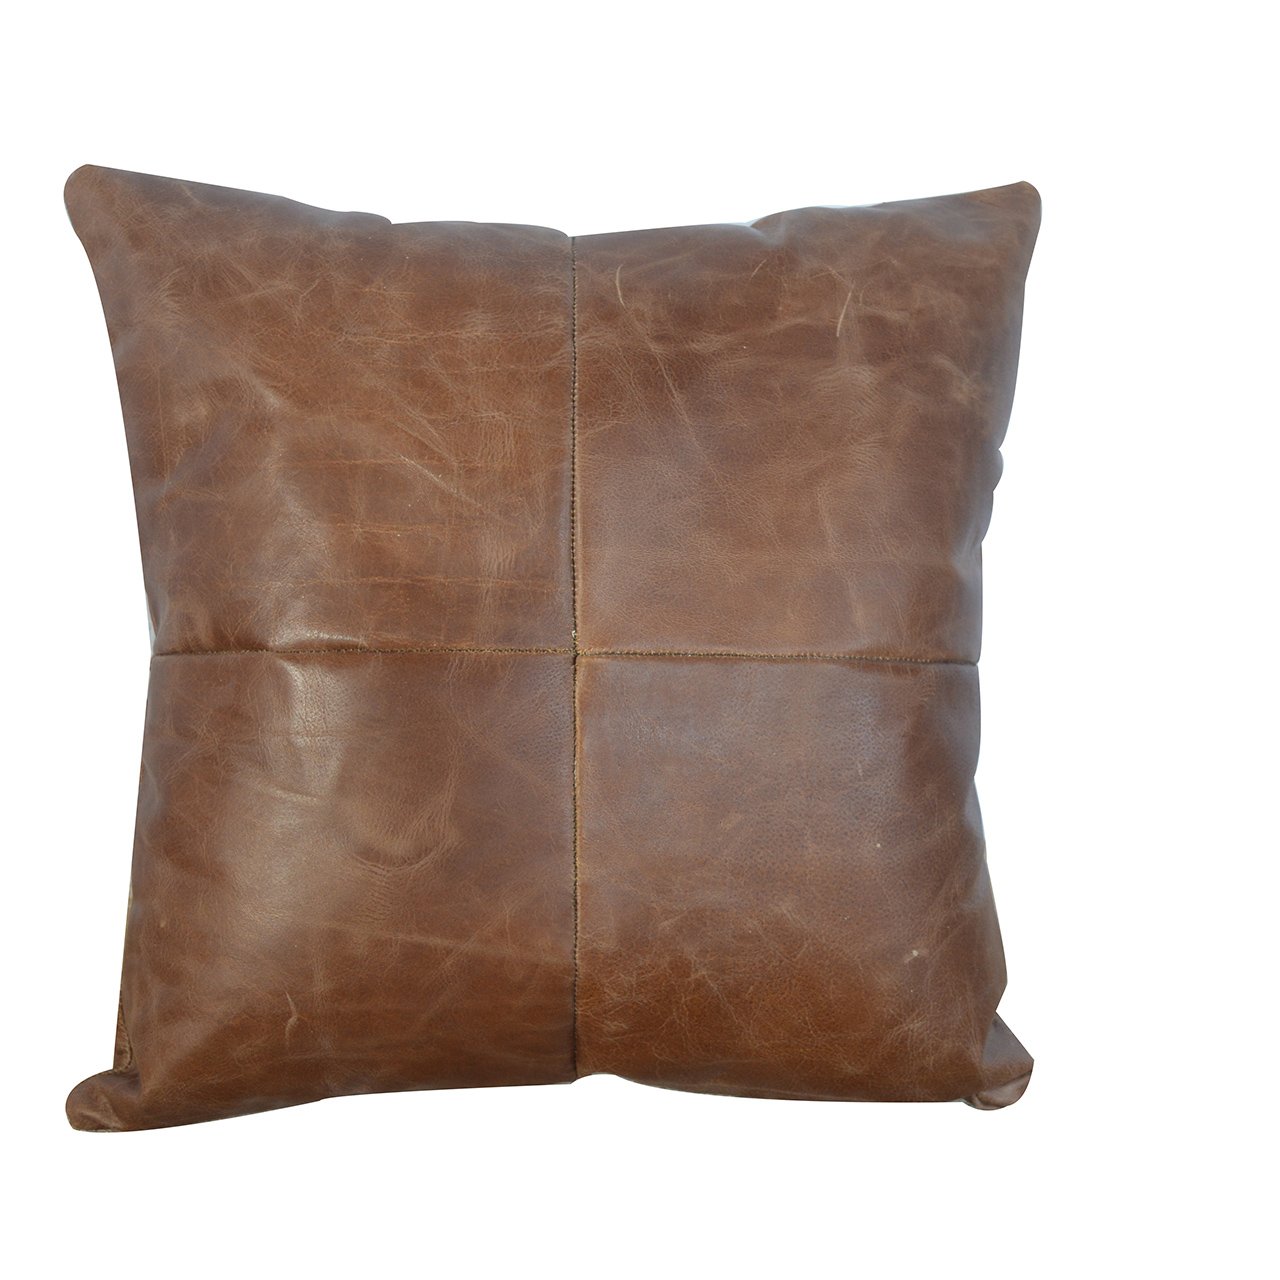 View Buffalo Hide Leather Scatter Cushion information